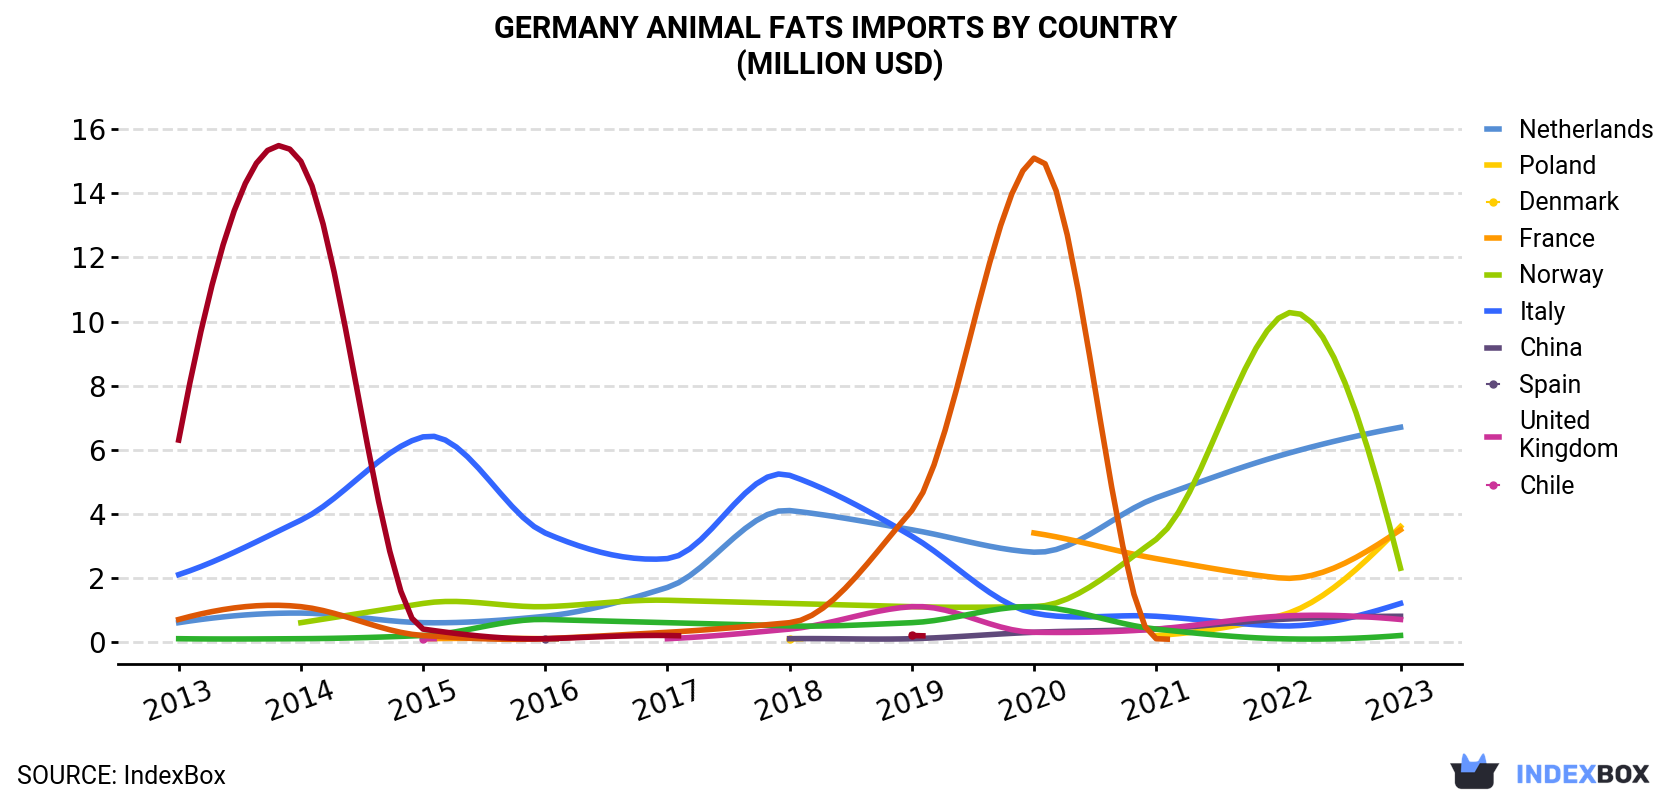 Germany Animal Fats Imports By Country (Million USD)